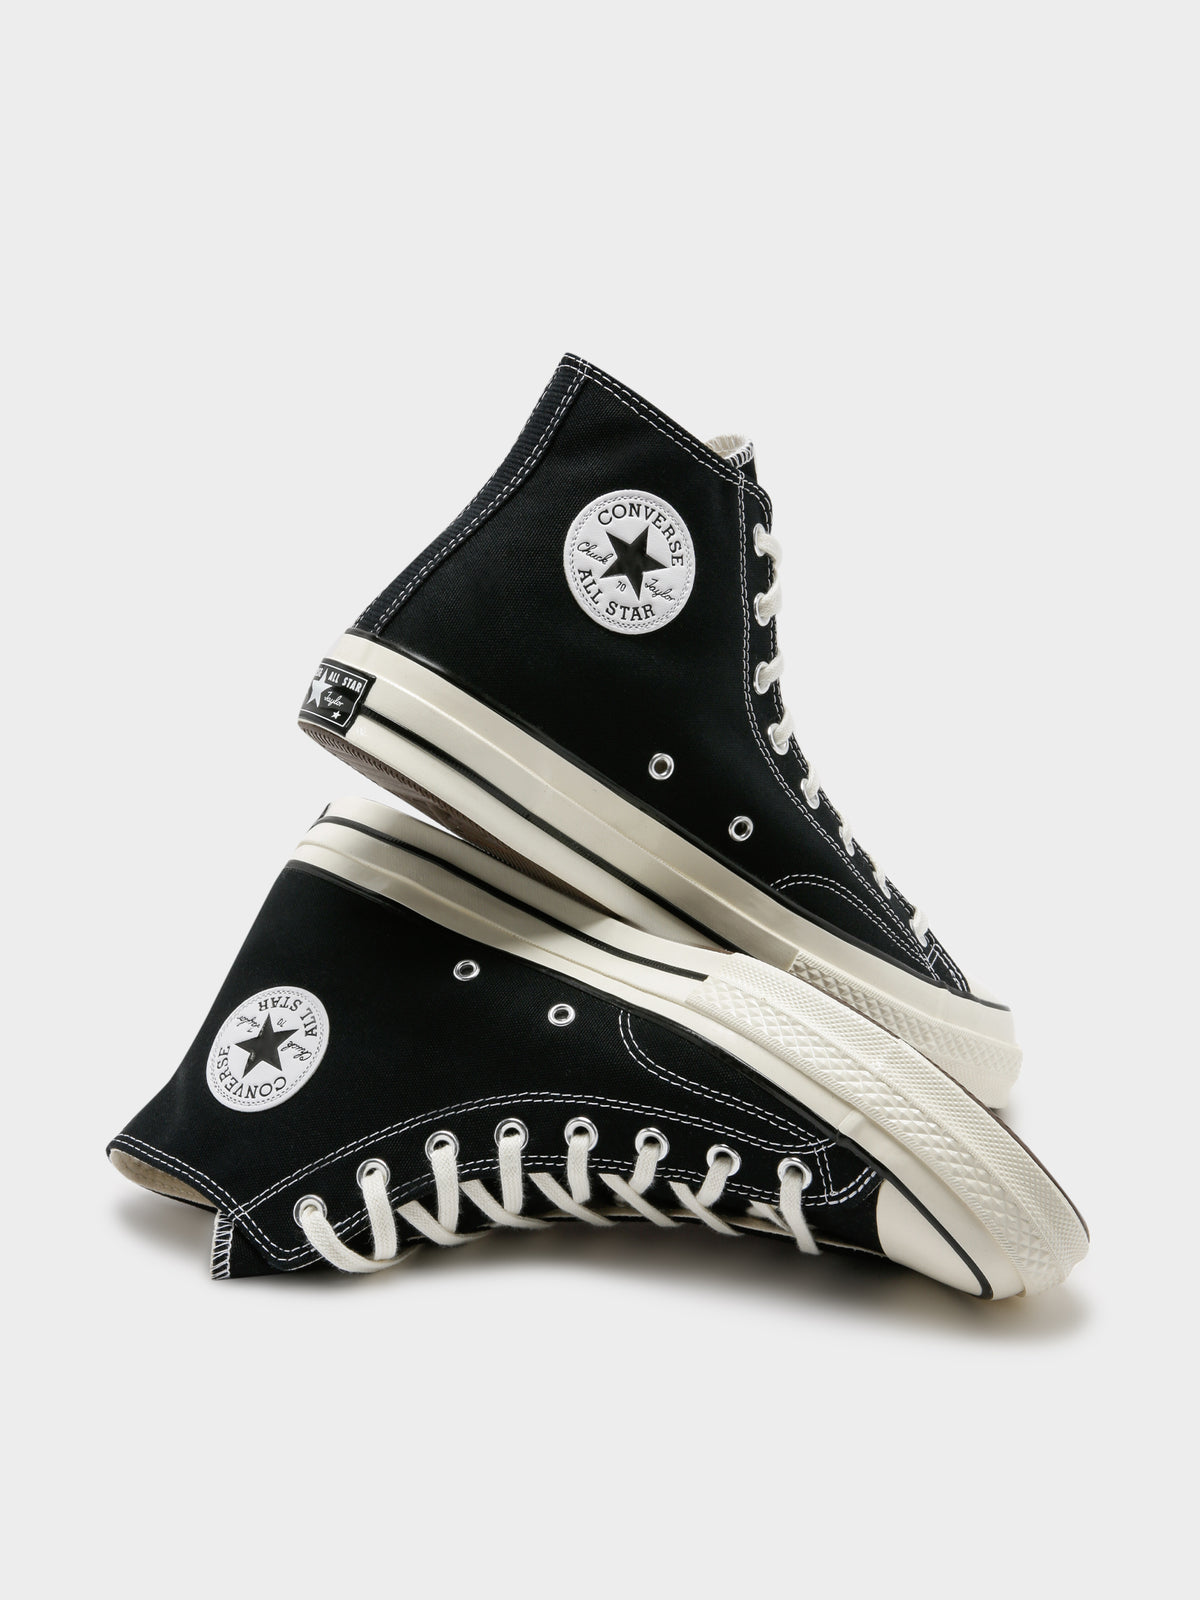 Unisex Chuck Taylor All Star 70 High Top Sneakers in Black